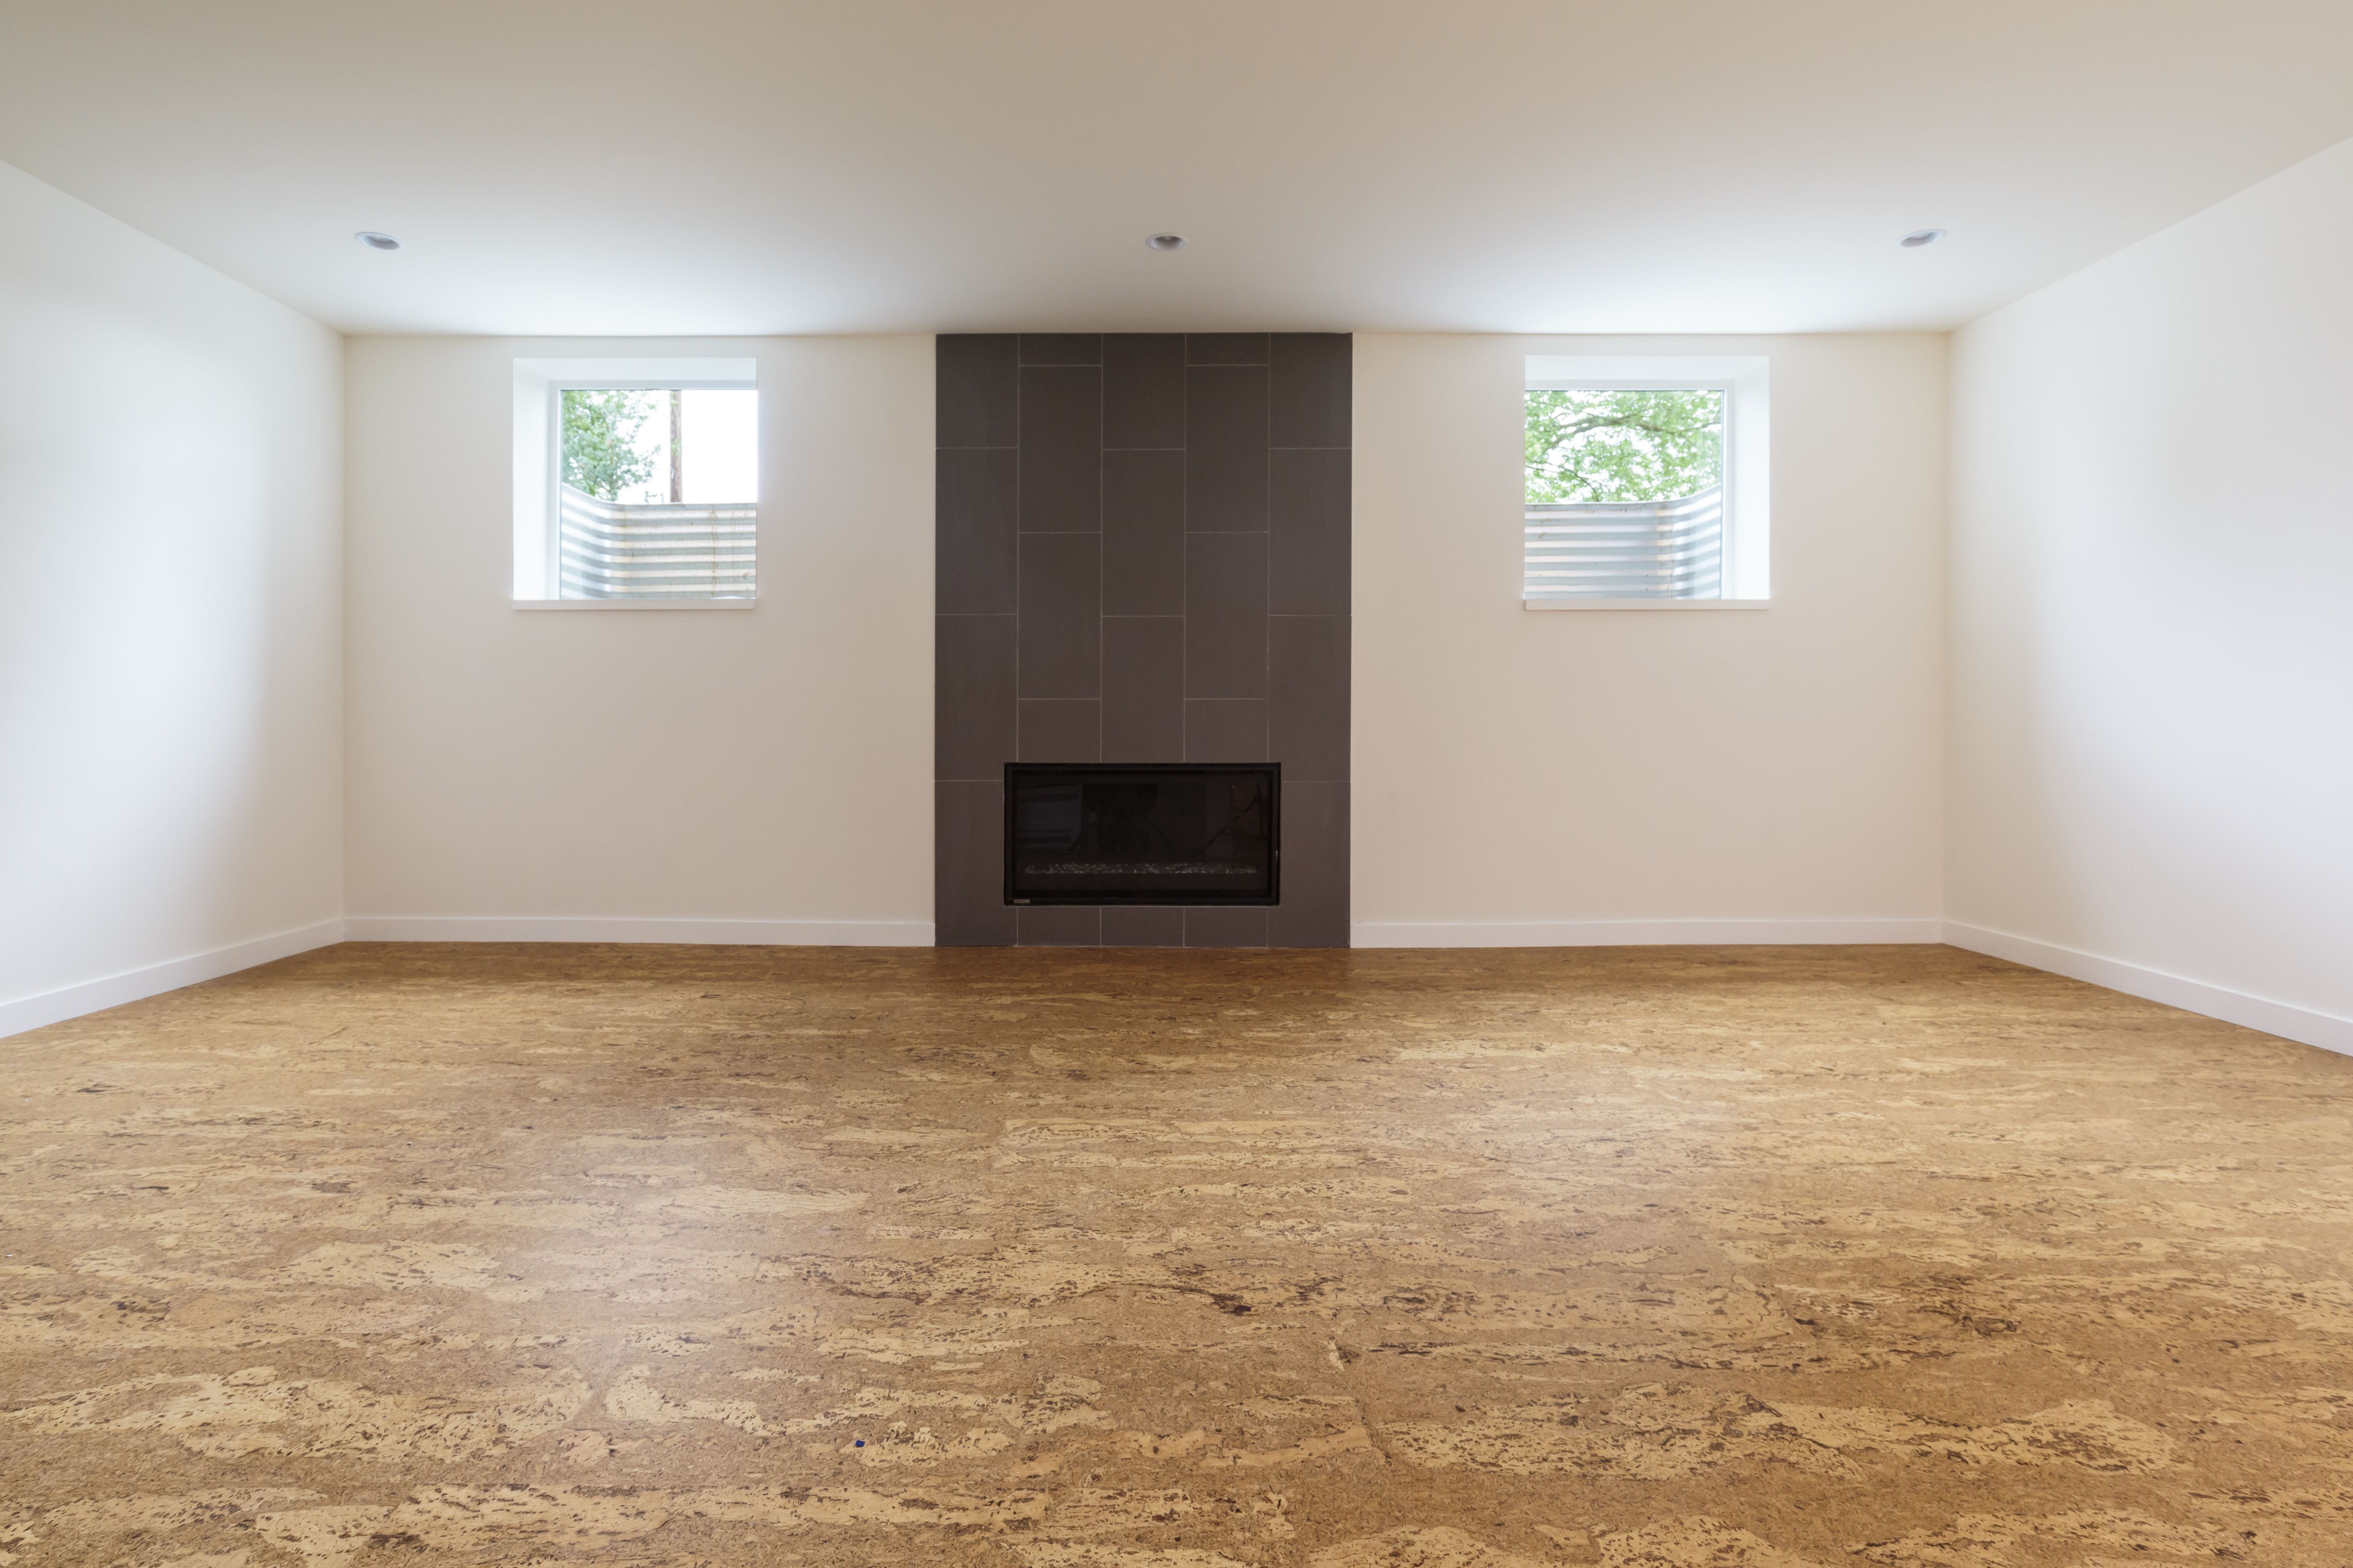 Hardwood Floor Installation Price Estimate Of Cork Flooring Pros Cons and Cost with Cork Flooring In Unfurnished New Home 647206431 57e7c0c95f9b586c3504ca07